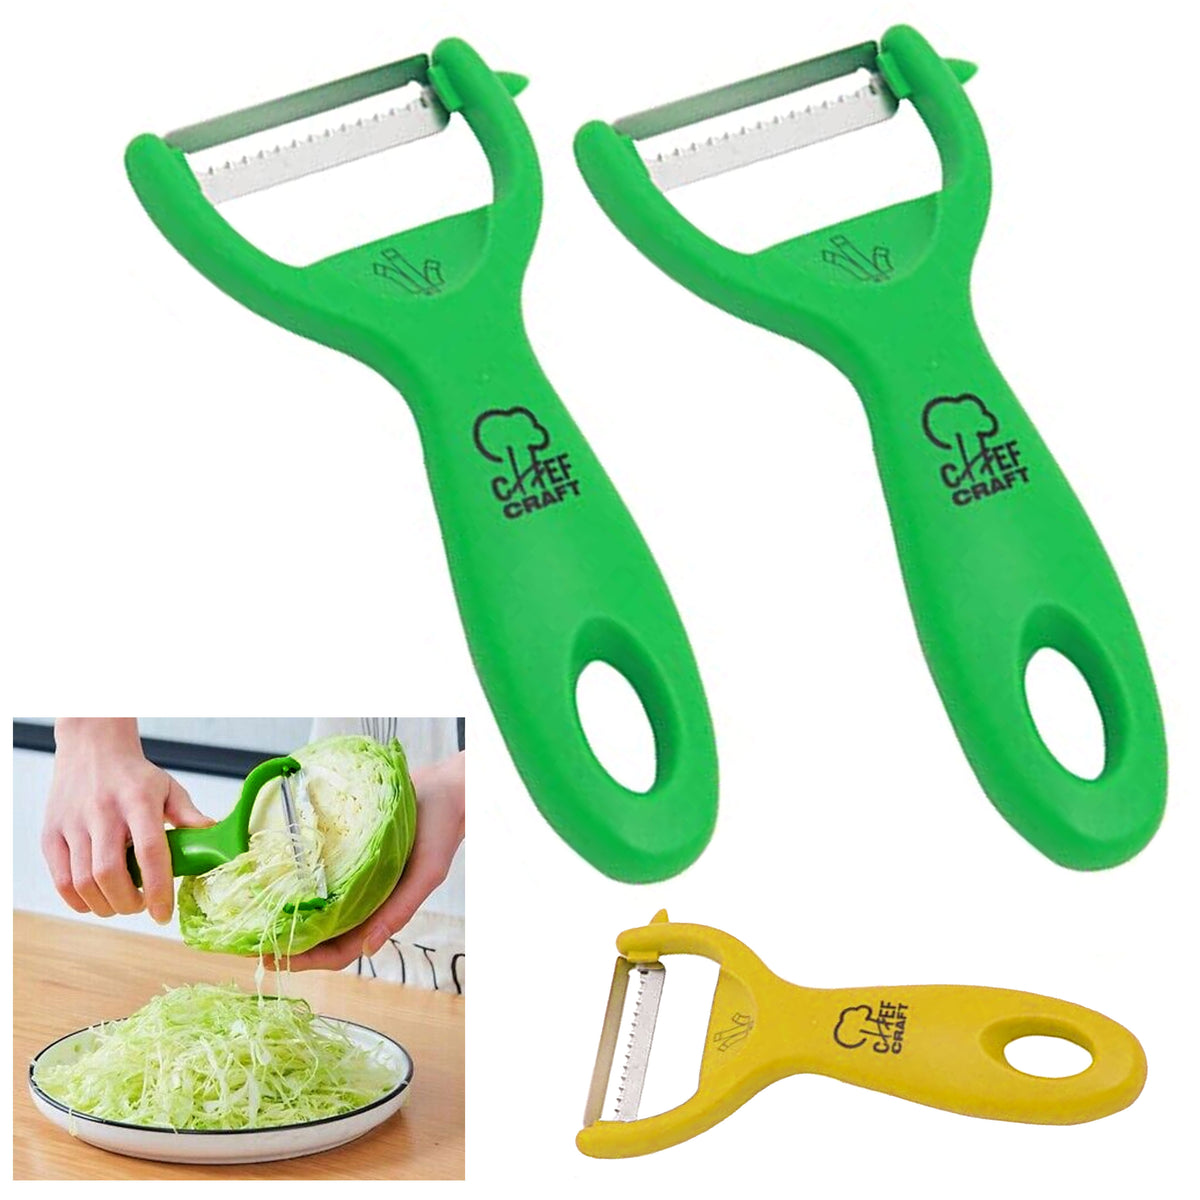 Chef Craft Y-Shaped Julienne Coarse Vegetable Peeler - Stainless